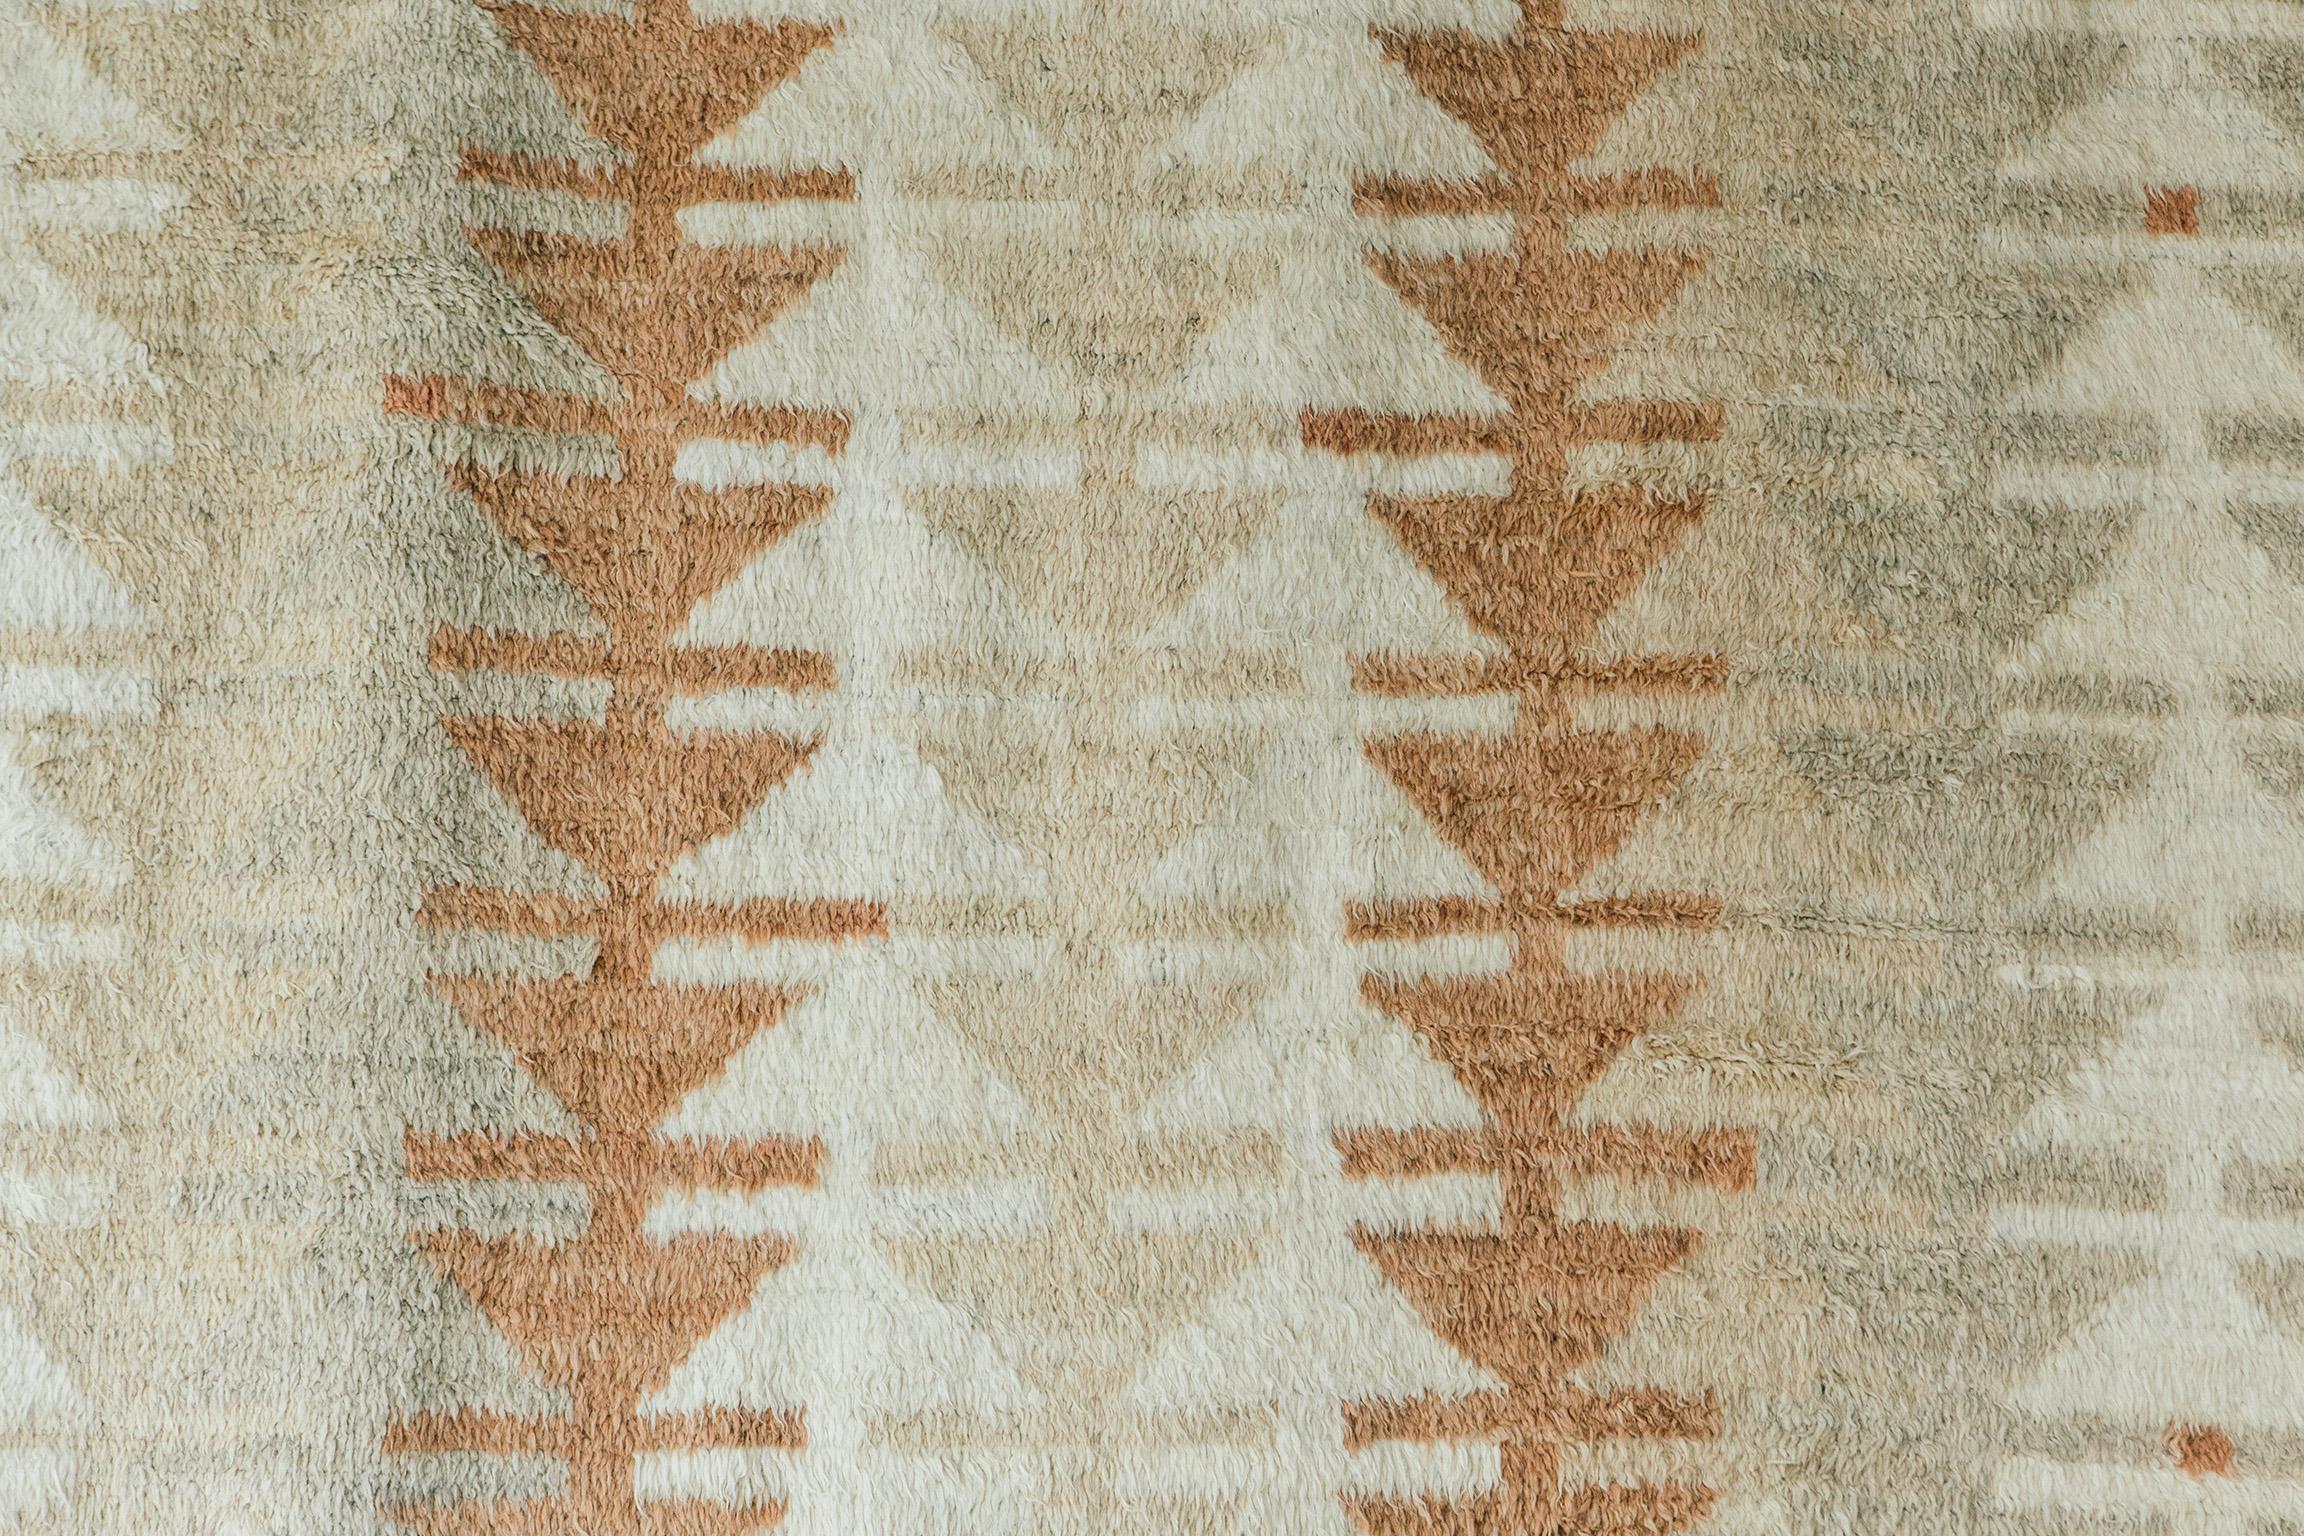 Designed is LA 'Borlange' is made up of luxurious handwoven wool, inspired by vintage Scandinavian design elements, and recreated for the modern design world. 'Kust' also meaning 'coast' was consciously designed for a proper coastal